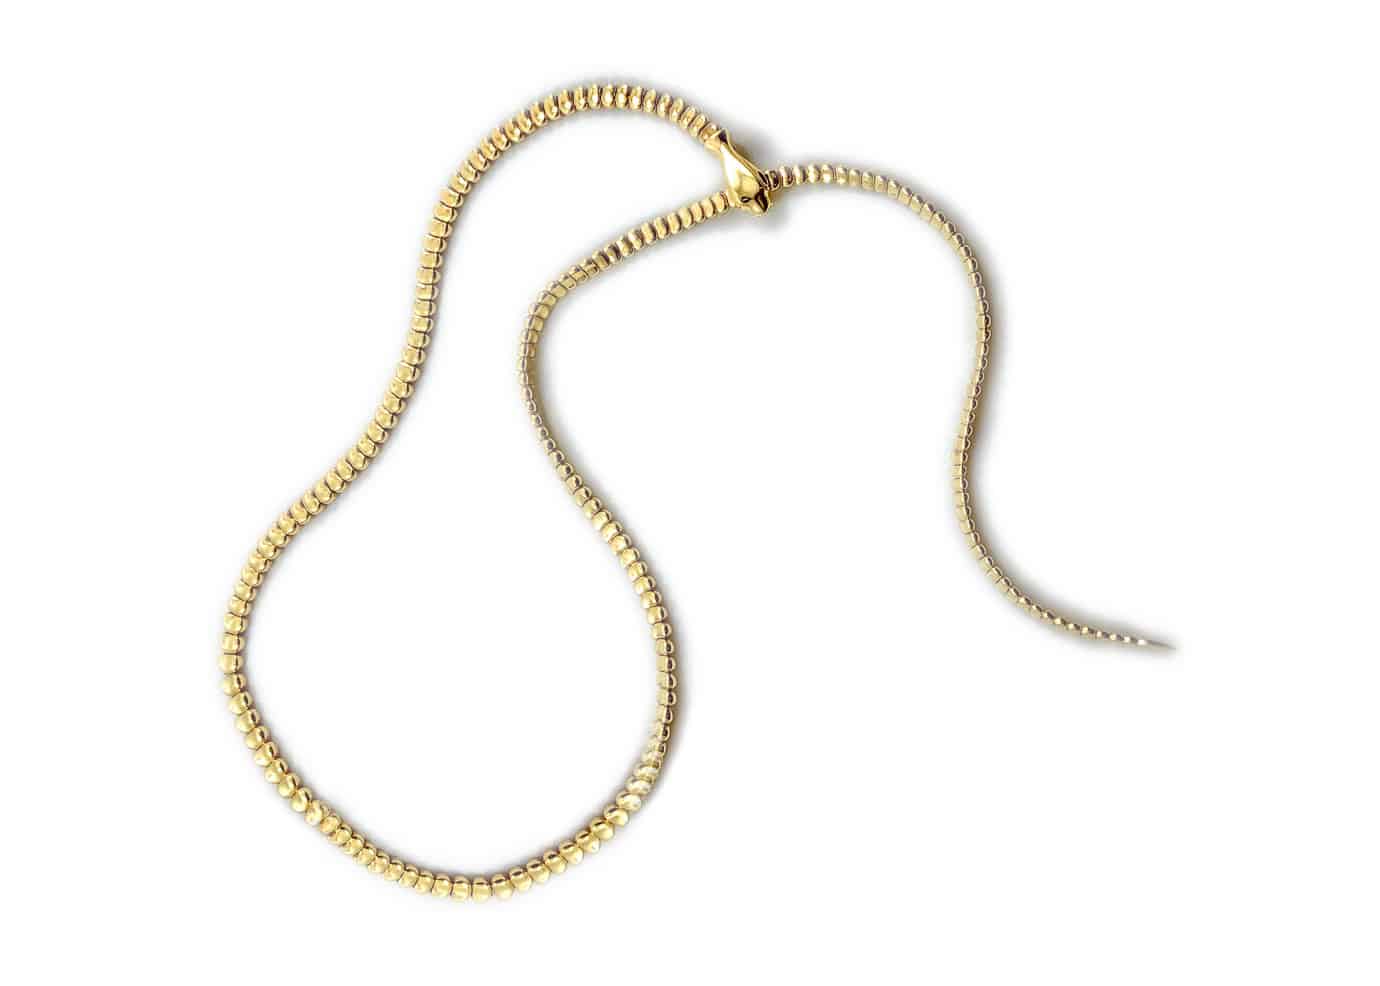 SNAKE CHAIN COLLAR NECKLACE - GOLD - FALLON JEWELRY